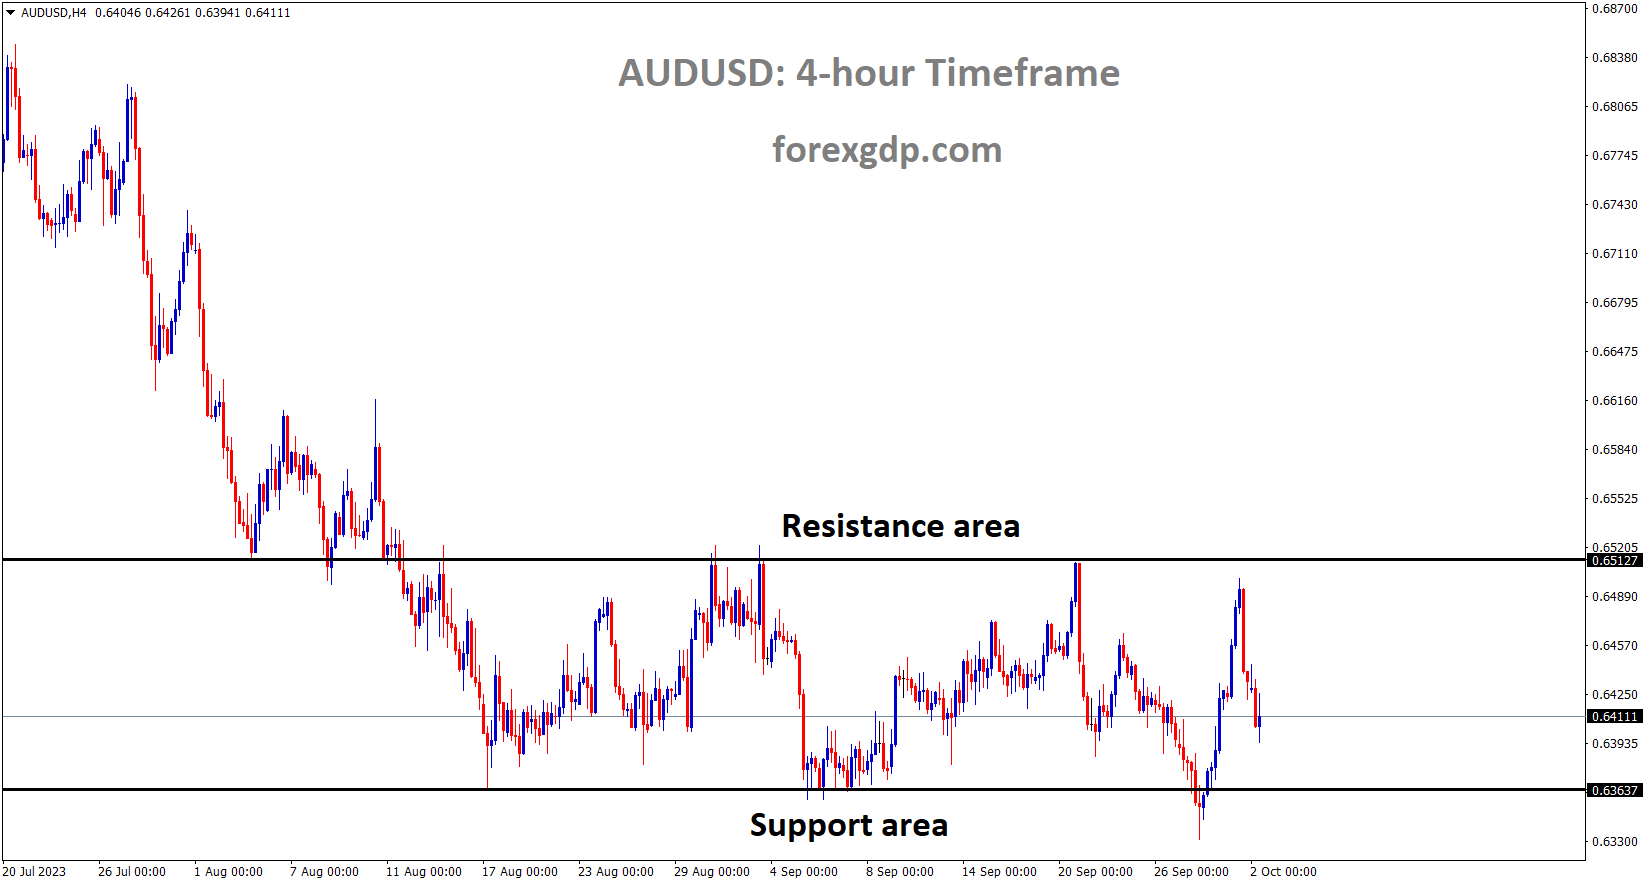 AUDUSD is moving in the Box pattern and the market has fallen from the resistance area of the pattern